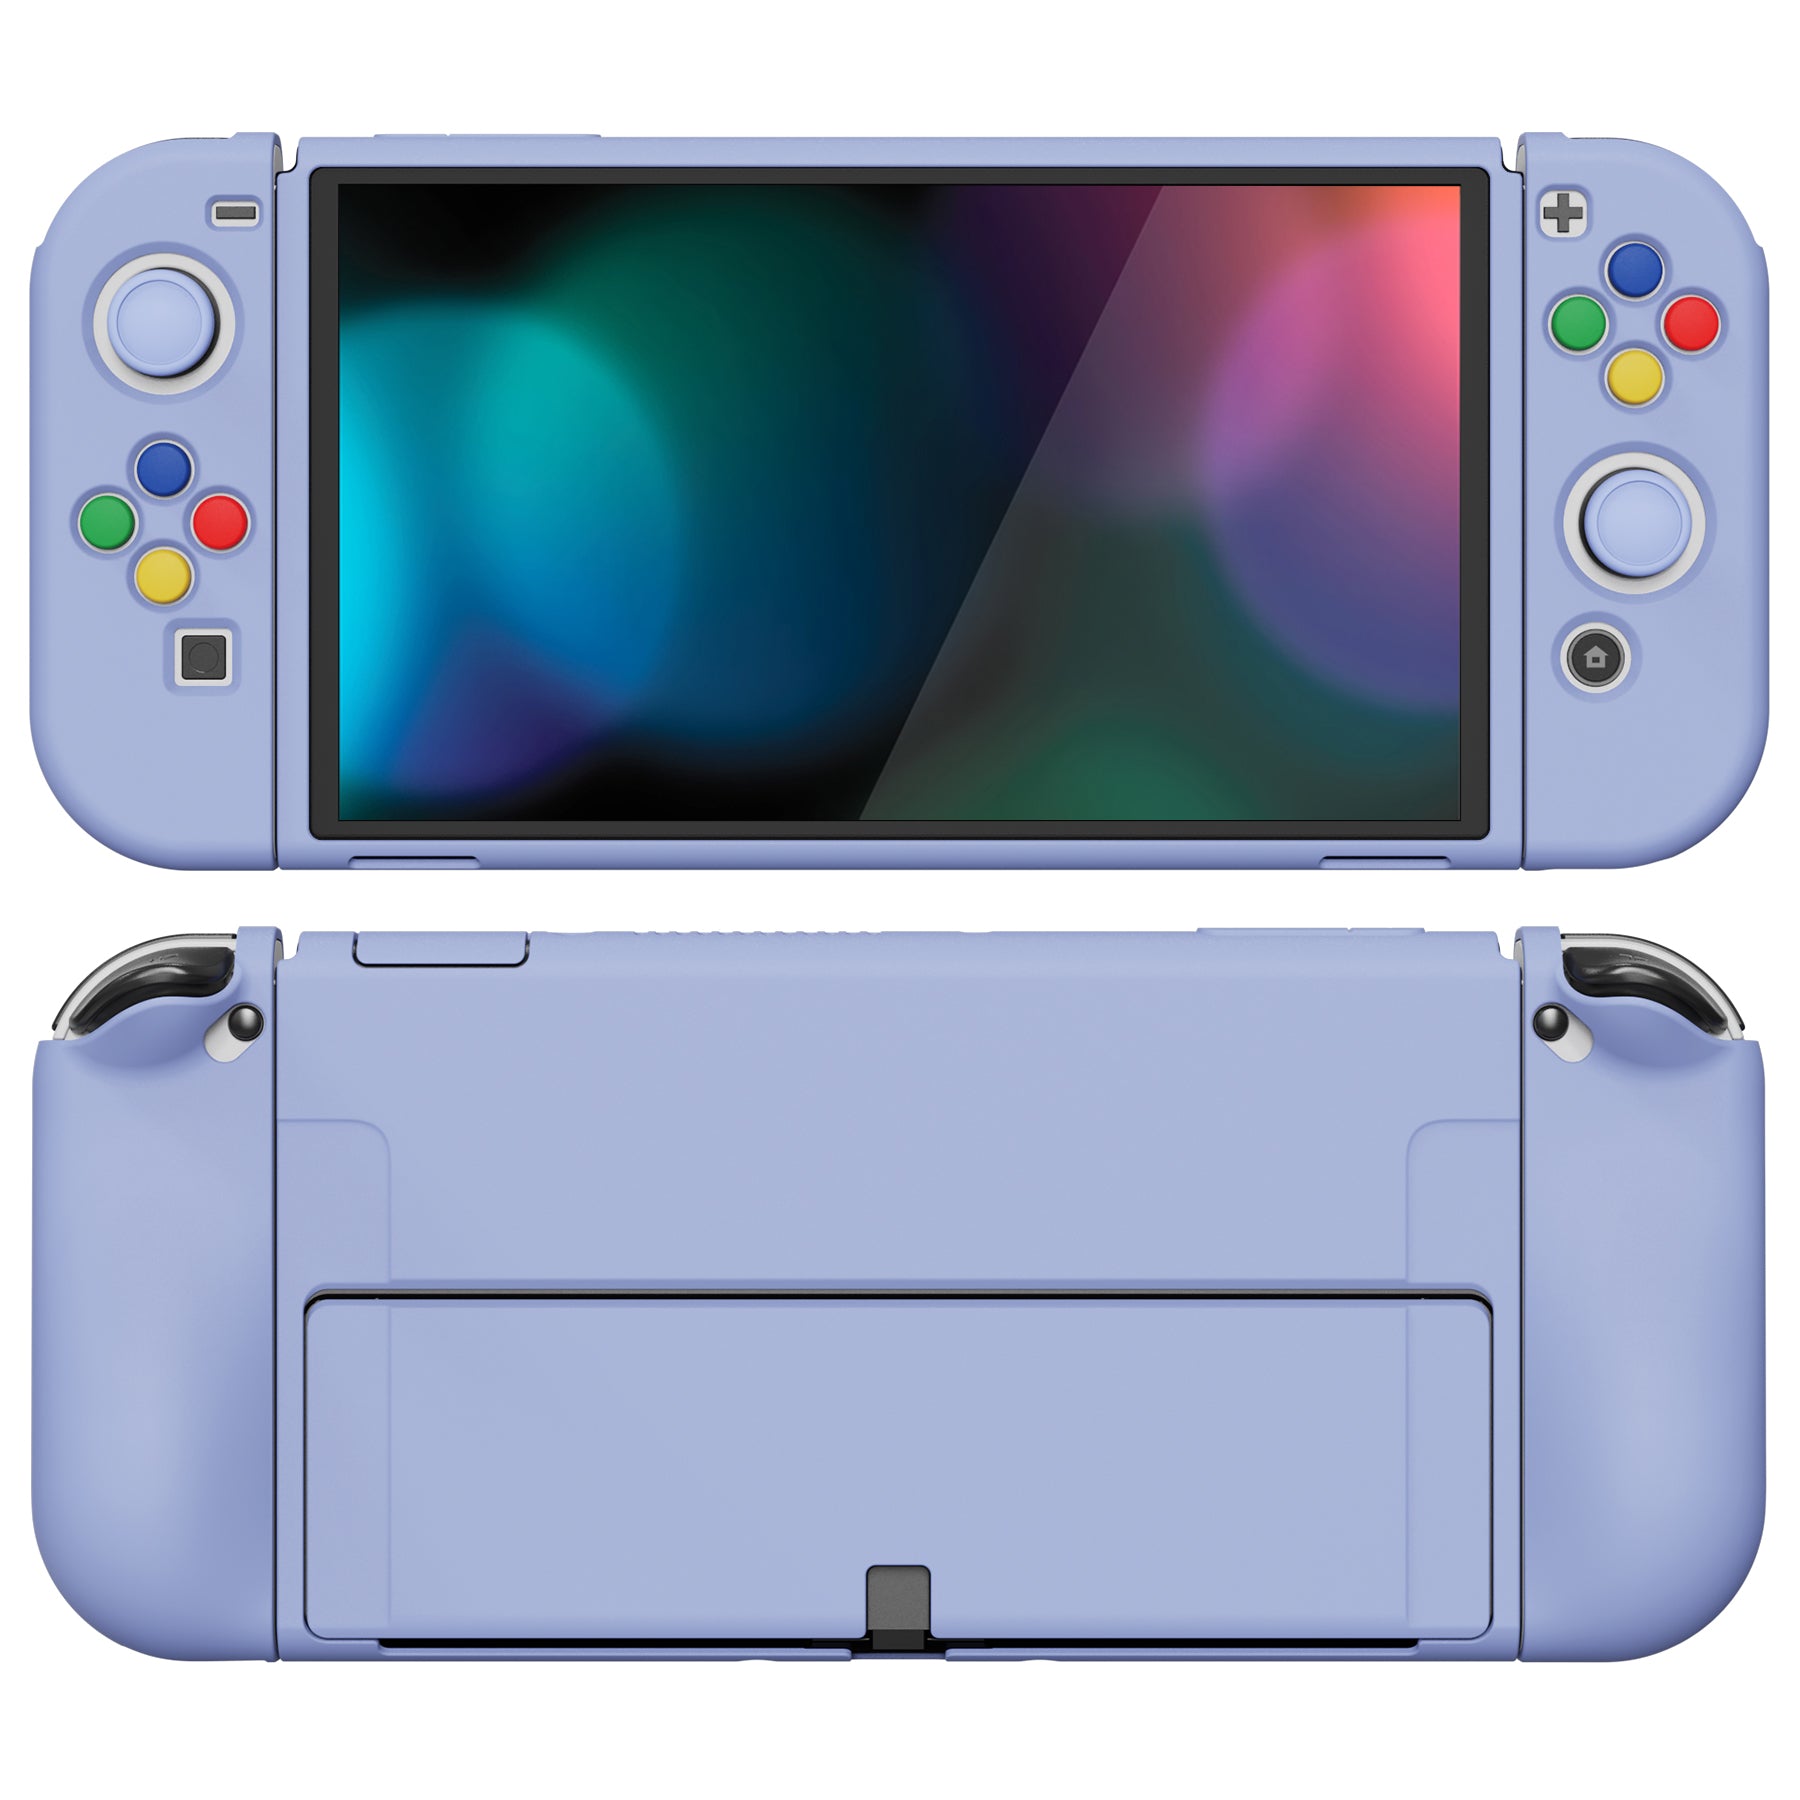 PlayVital ZealProtect Soft Protective Case for Switch OLED, Flexible Protector Joycon Grip Cover for Switch OLED with Thumb Grip Caps & ABXY Direction Button Caps - Light Violet - XSOYM5003 playvital